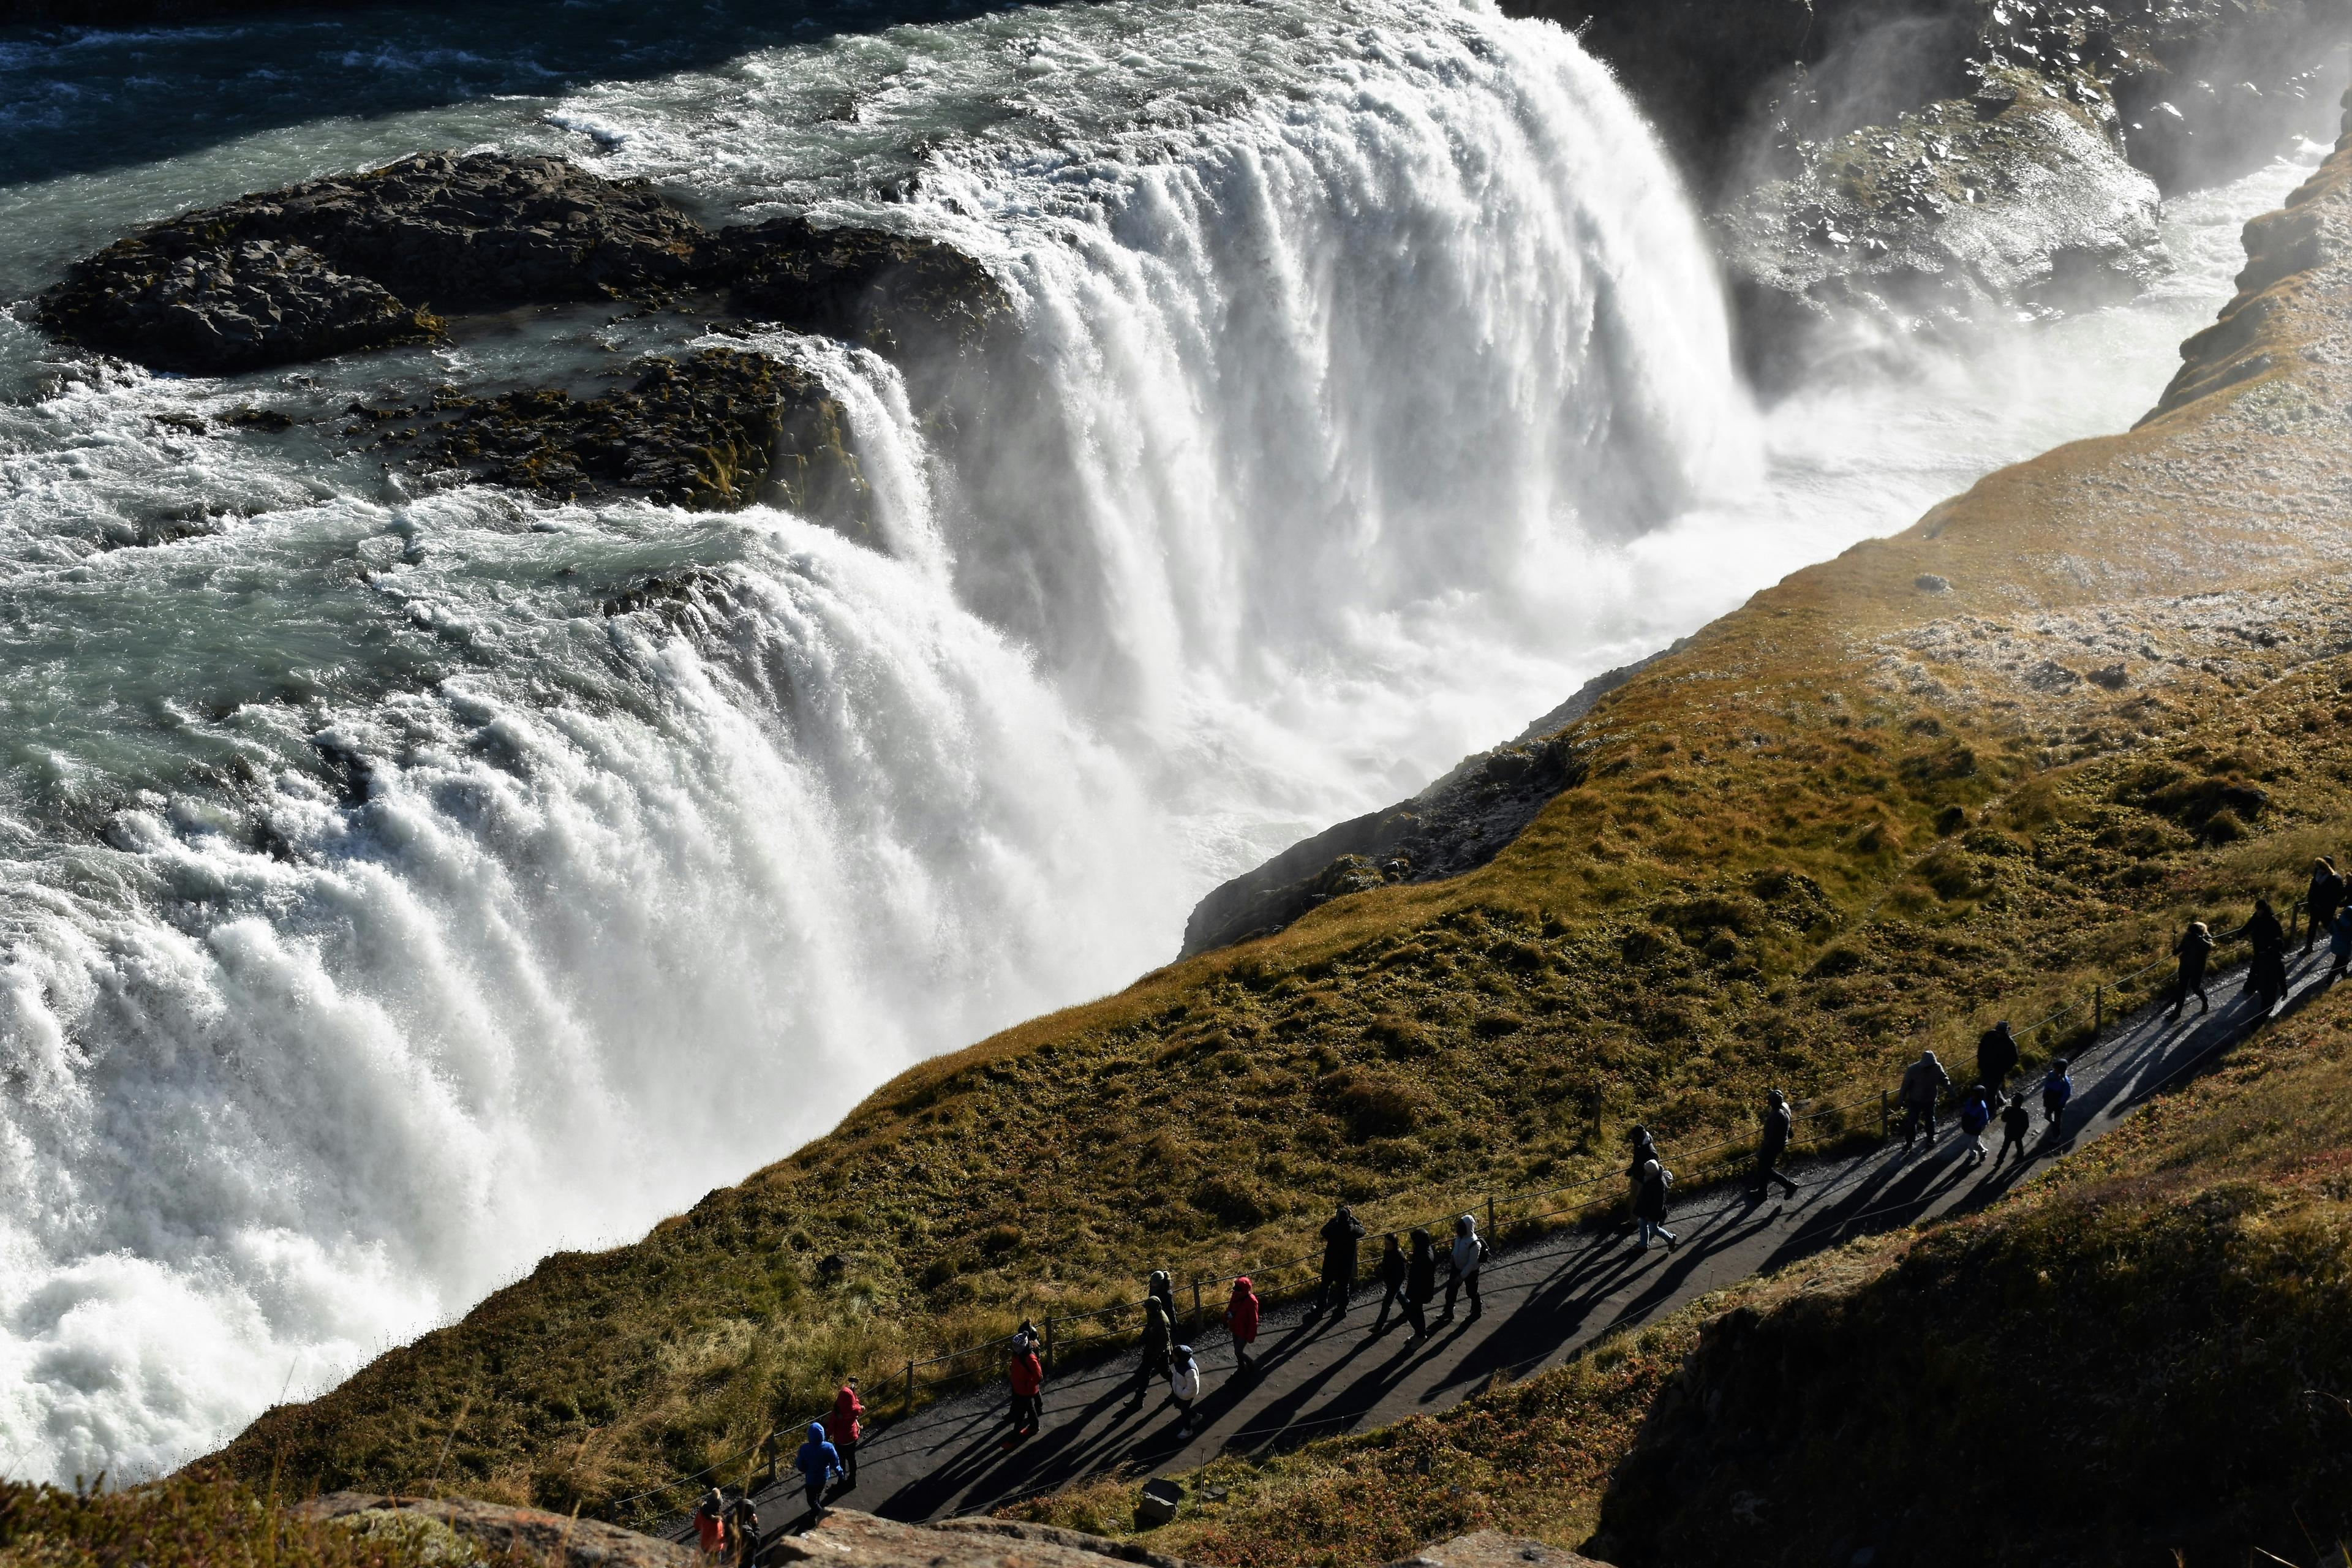 Visitors on a path observing a robust waterfall as it descends in a powerful rush, with the sunlight accentuating the spray and textures of the landscape, a scene likely from one of Iceland's popular natural attractions.